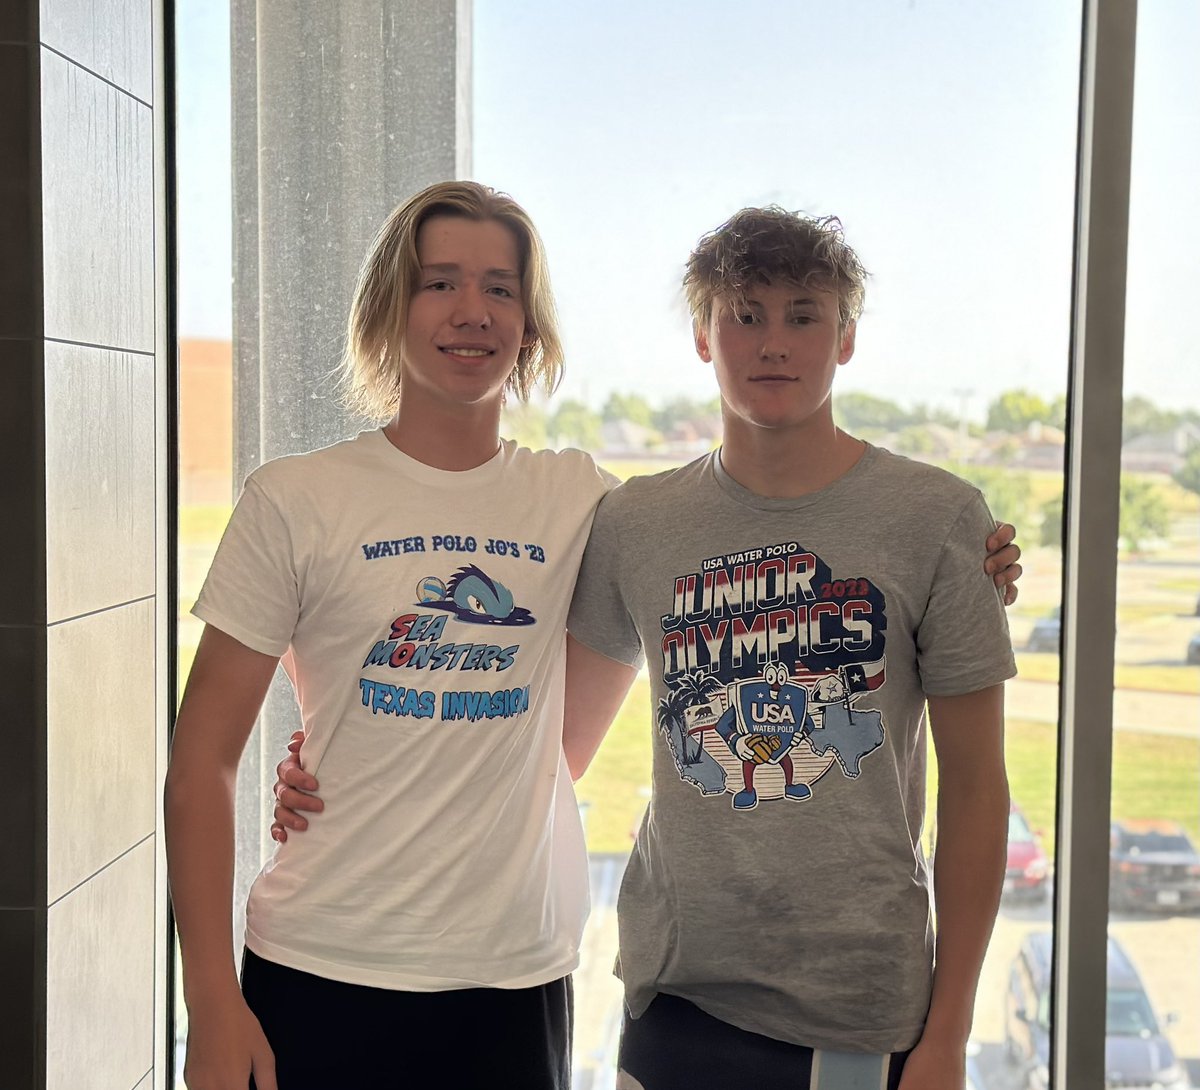 Playing alongside my Milford Eagle teammate in Texas for JOs #2023JOs #WaterPolo @seamonsterspolo @Milford_Eagles @MilfordPolo @NicholasHaller6